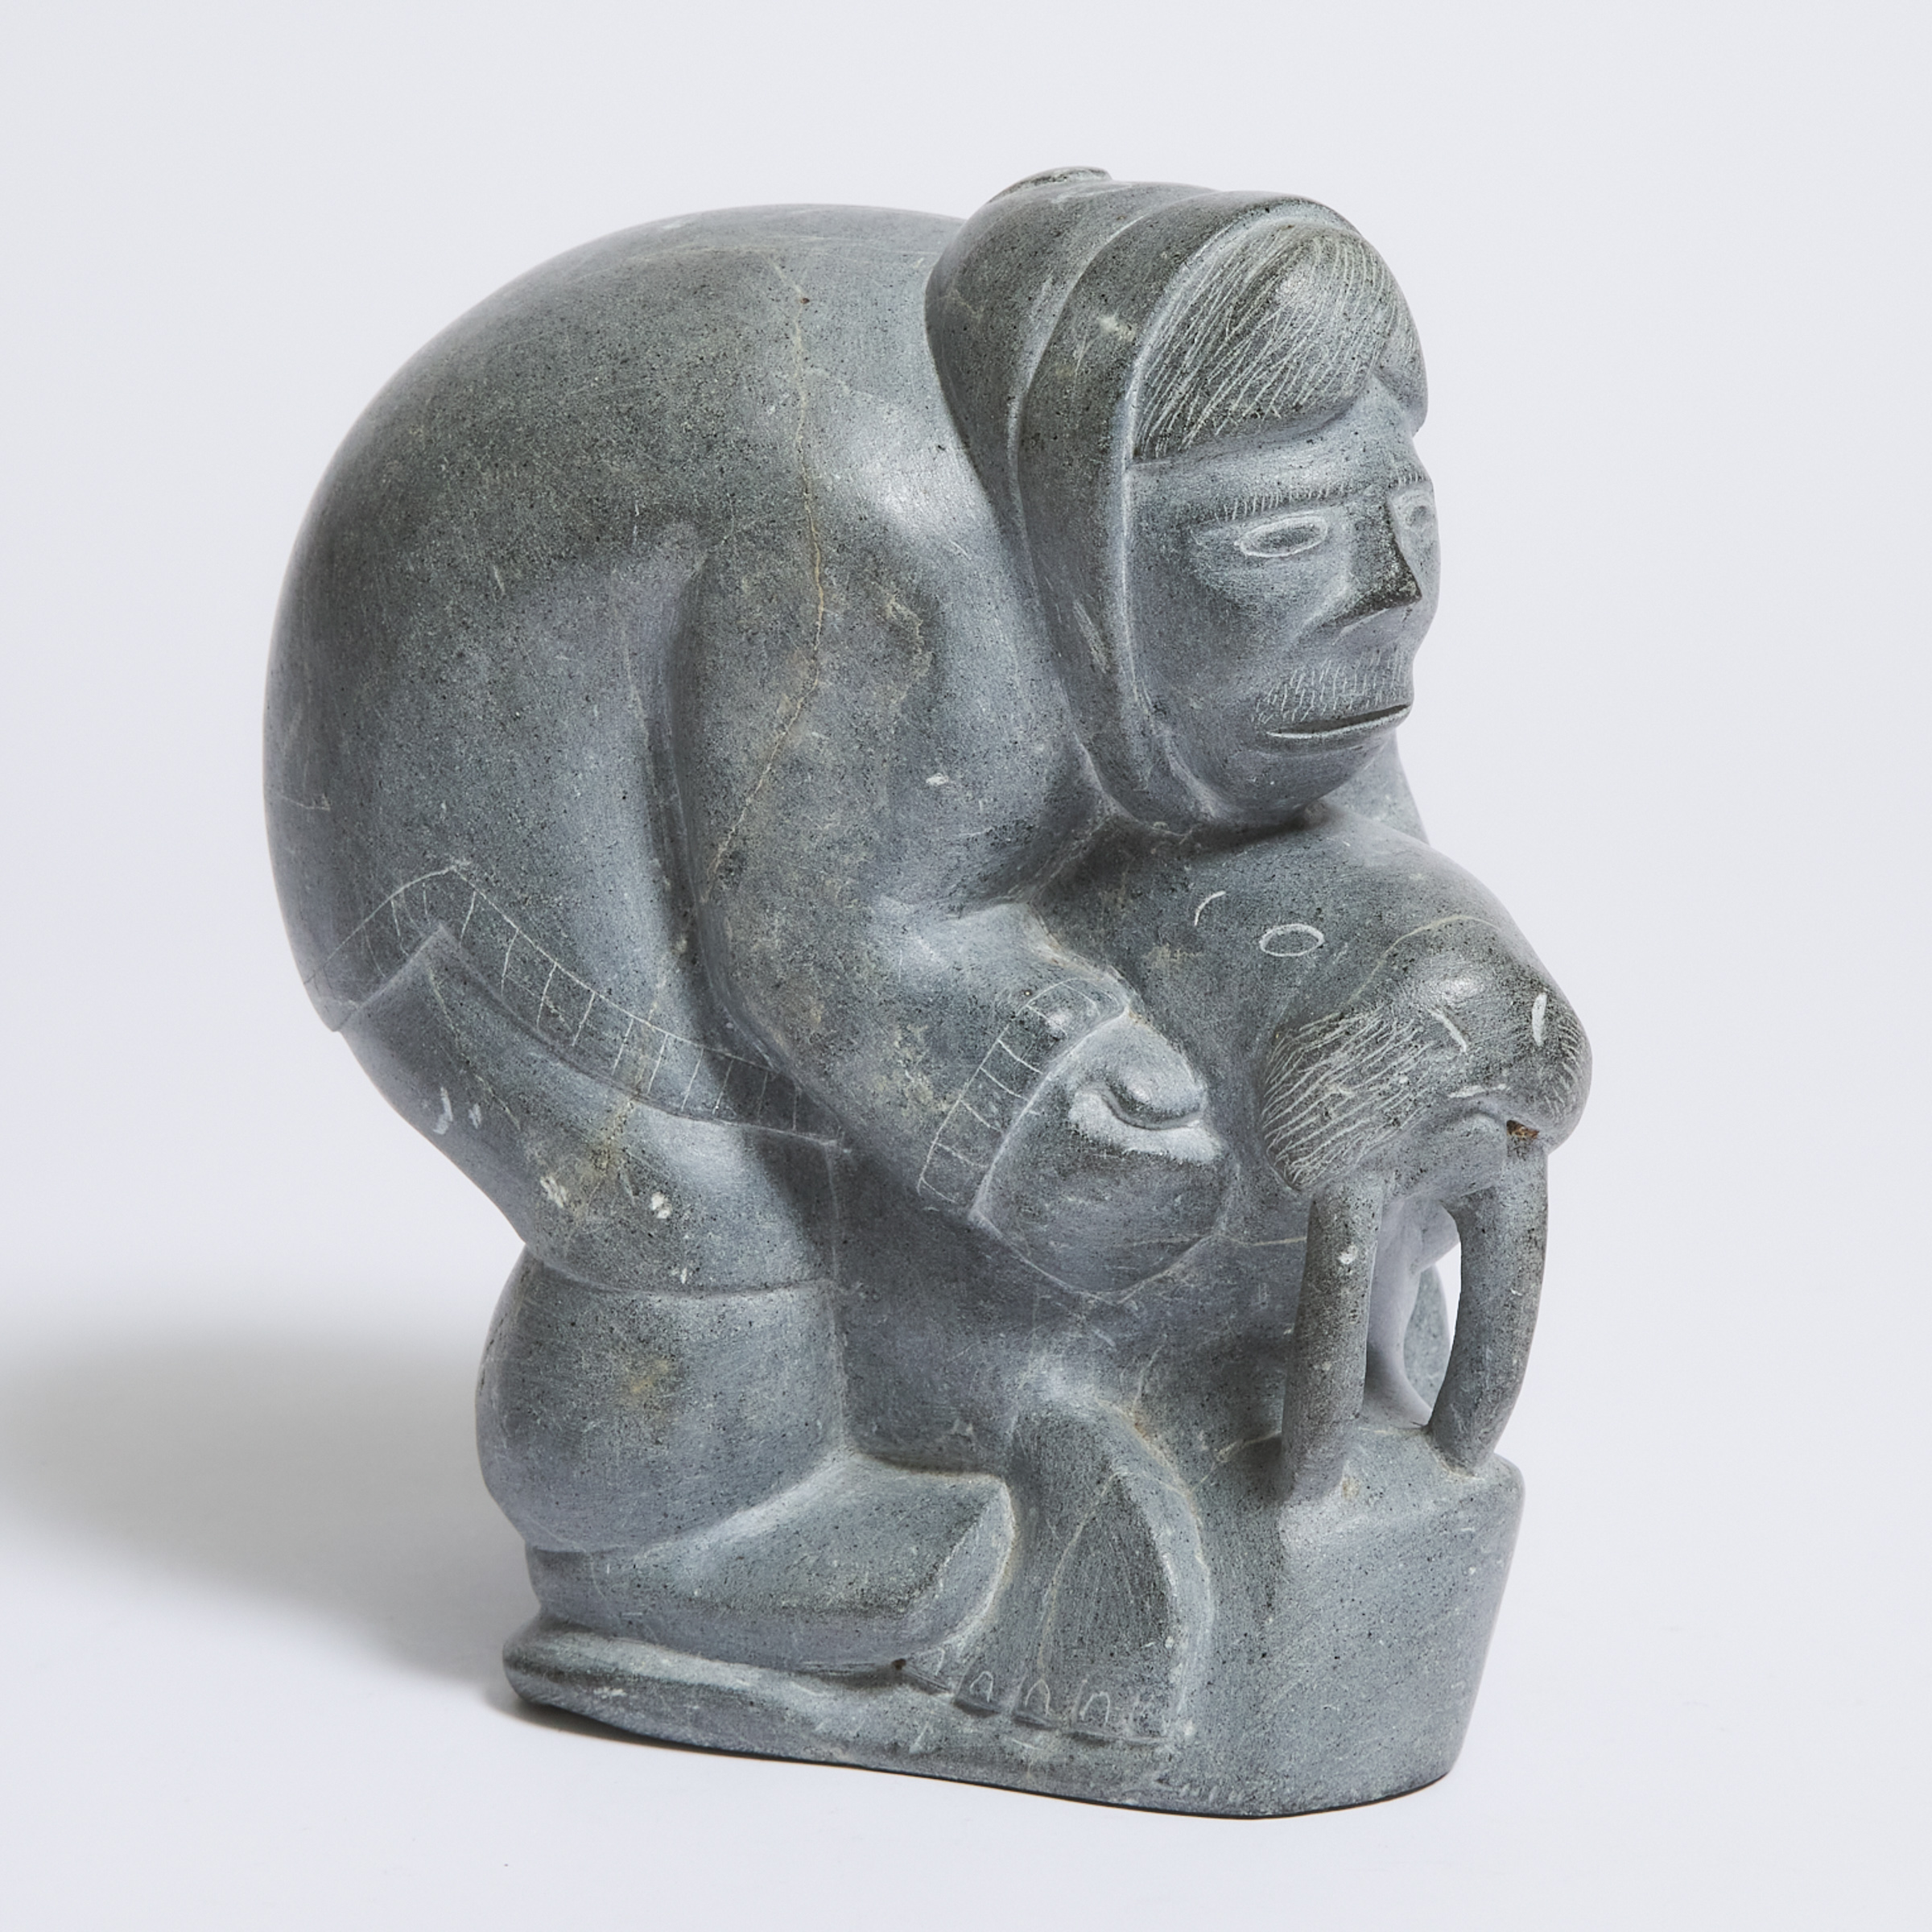 Inuit Art: Visions of Transformation